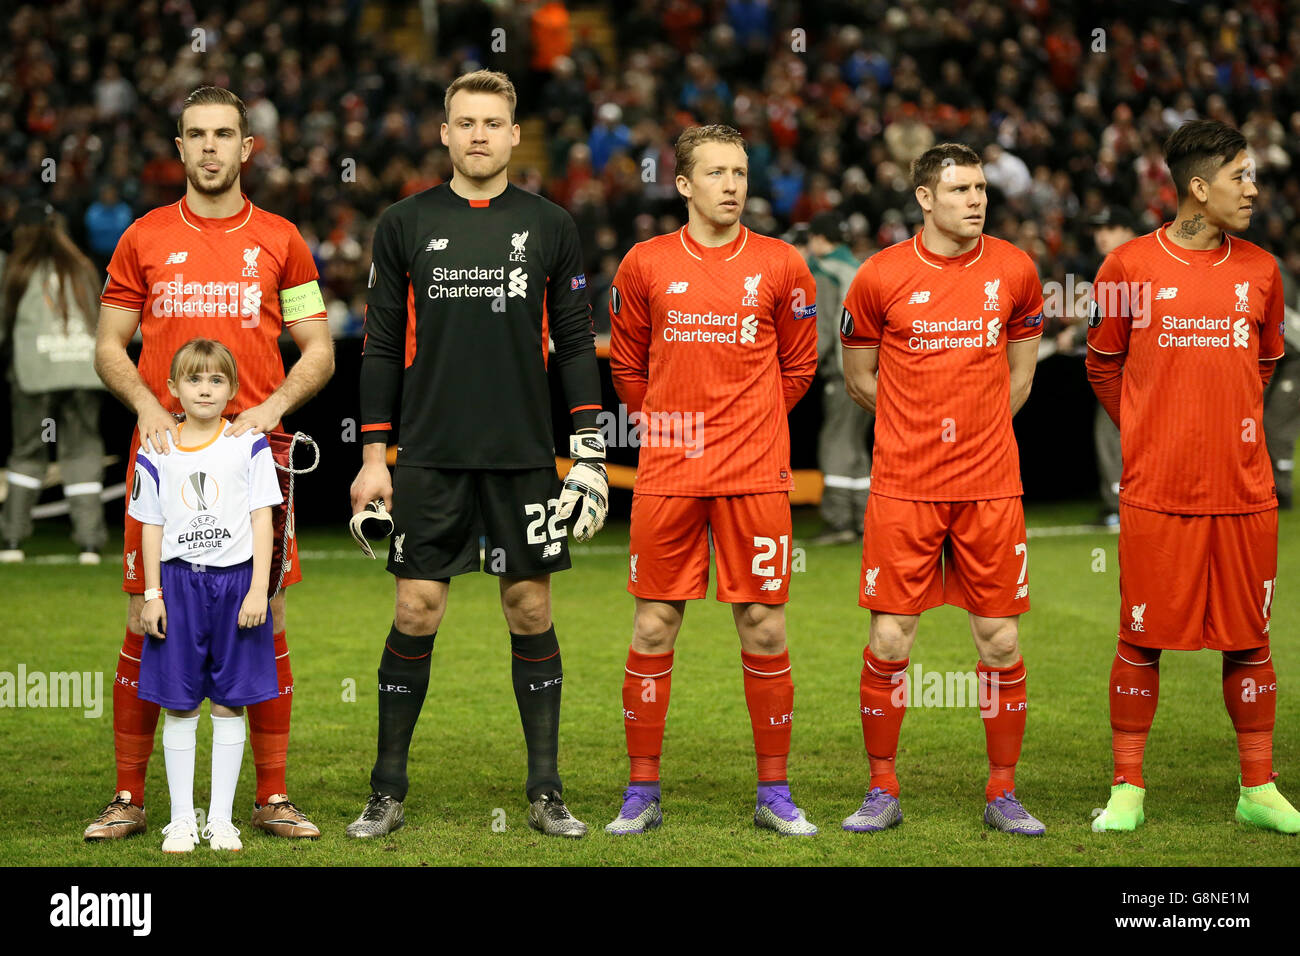 Liverpool's Jordan henderson, Simon Mignolet, Lucas Leiva, James Milner and Roberto Firmino (left to right) line up before the UEFA Europa League match at Anfield, Liverpool. PRESS ASSOCIATION Photo. Picture date: Thursday February 25, 2016. See PA story SOCCER Liverpool. Photo credit should read: PA Wire. Stock Photo